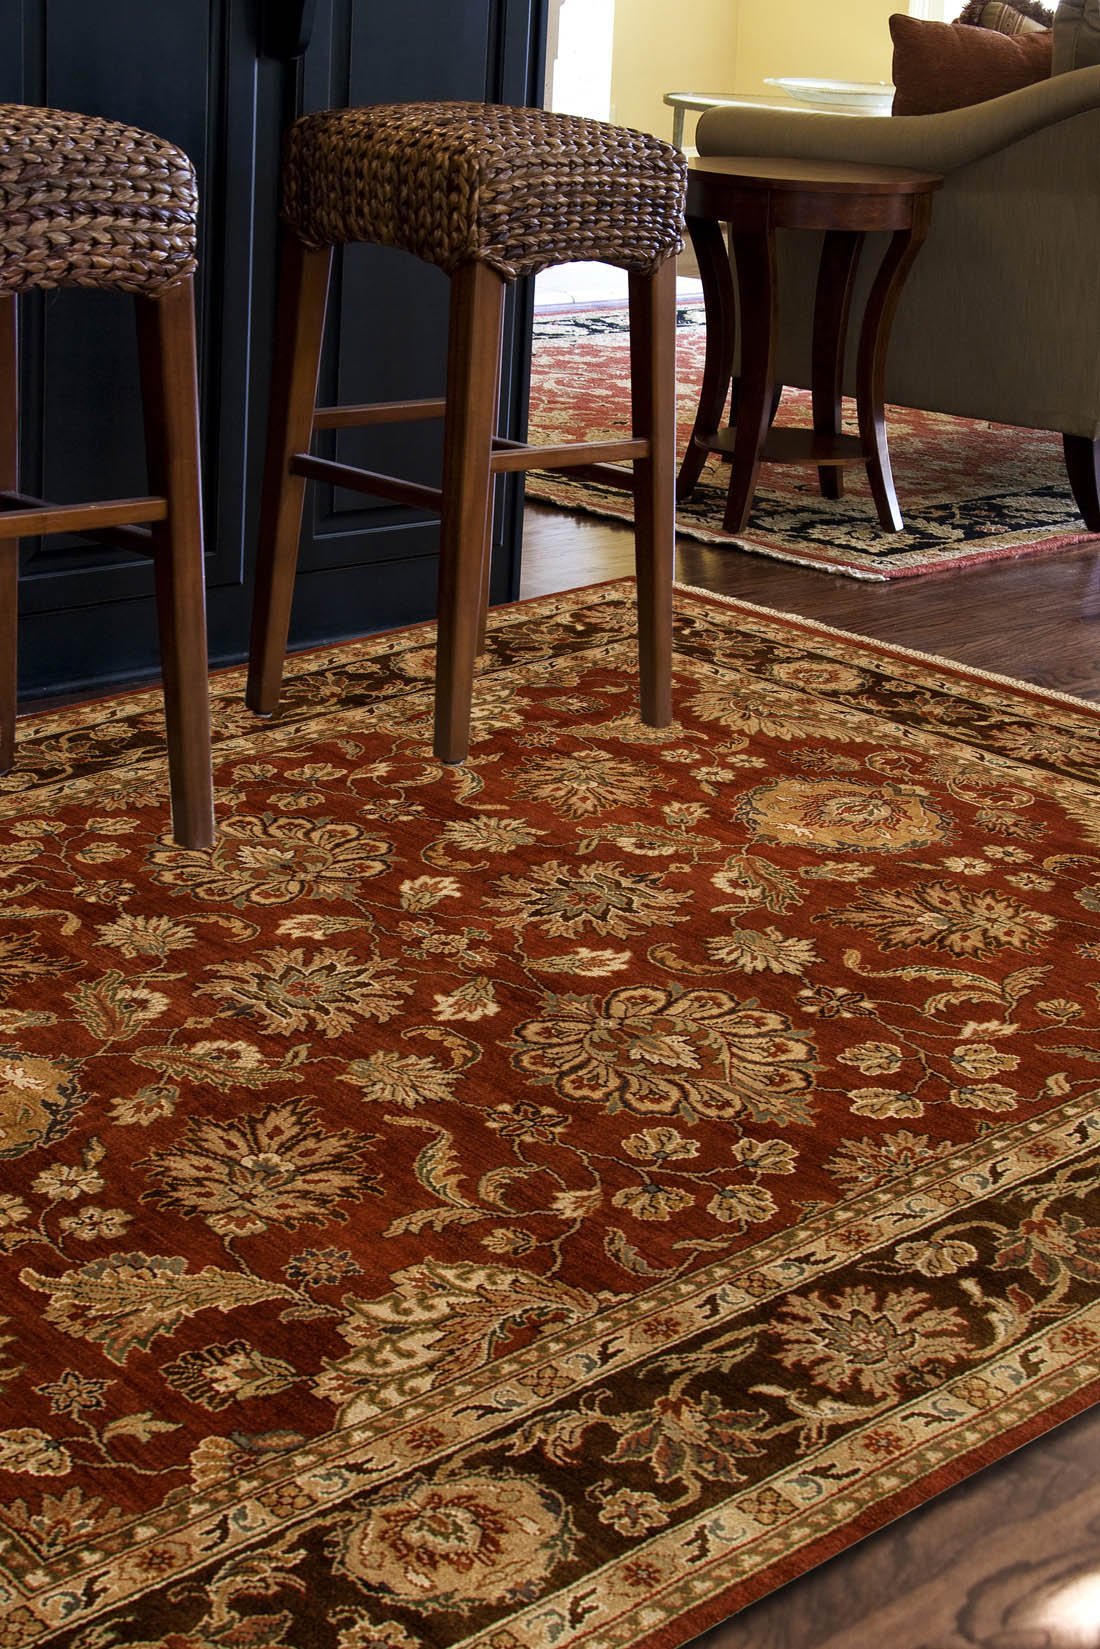 How To Mix Multiple Rugs in the Same Room - Rug & Home